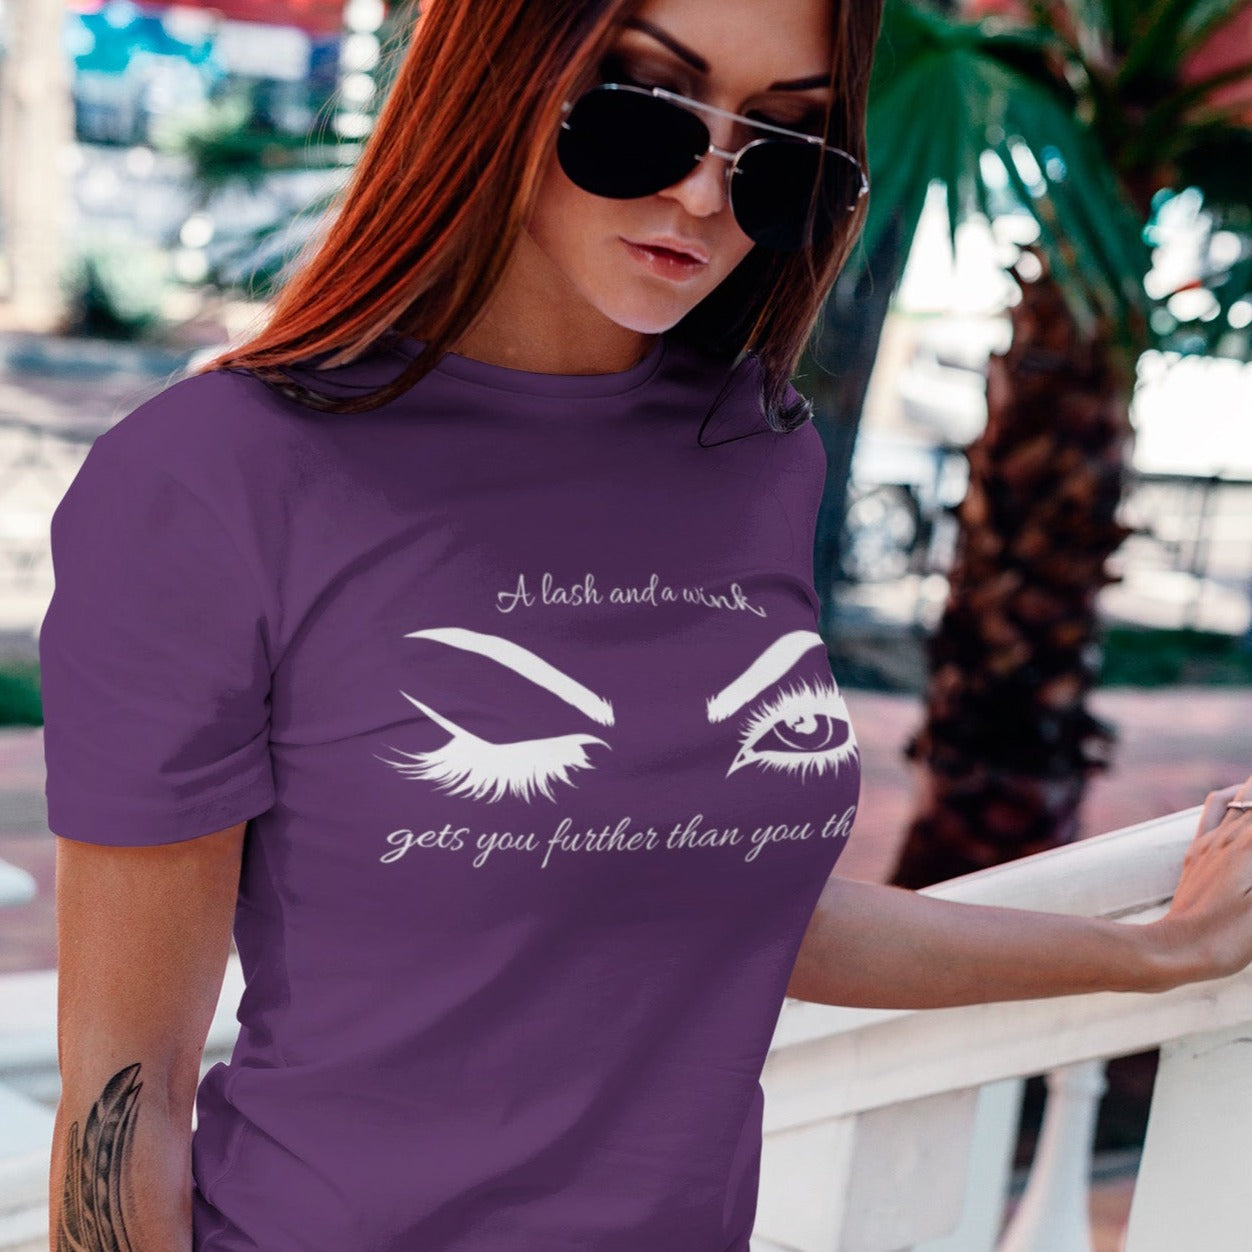 a-lash-and-a-wink-gets-you-further-than-you-think-team-purple-t-shirt-womens-lashes-mockup-featuring-a-tattooed-woman-with-sunglasses